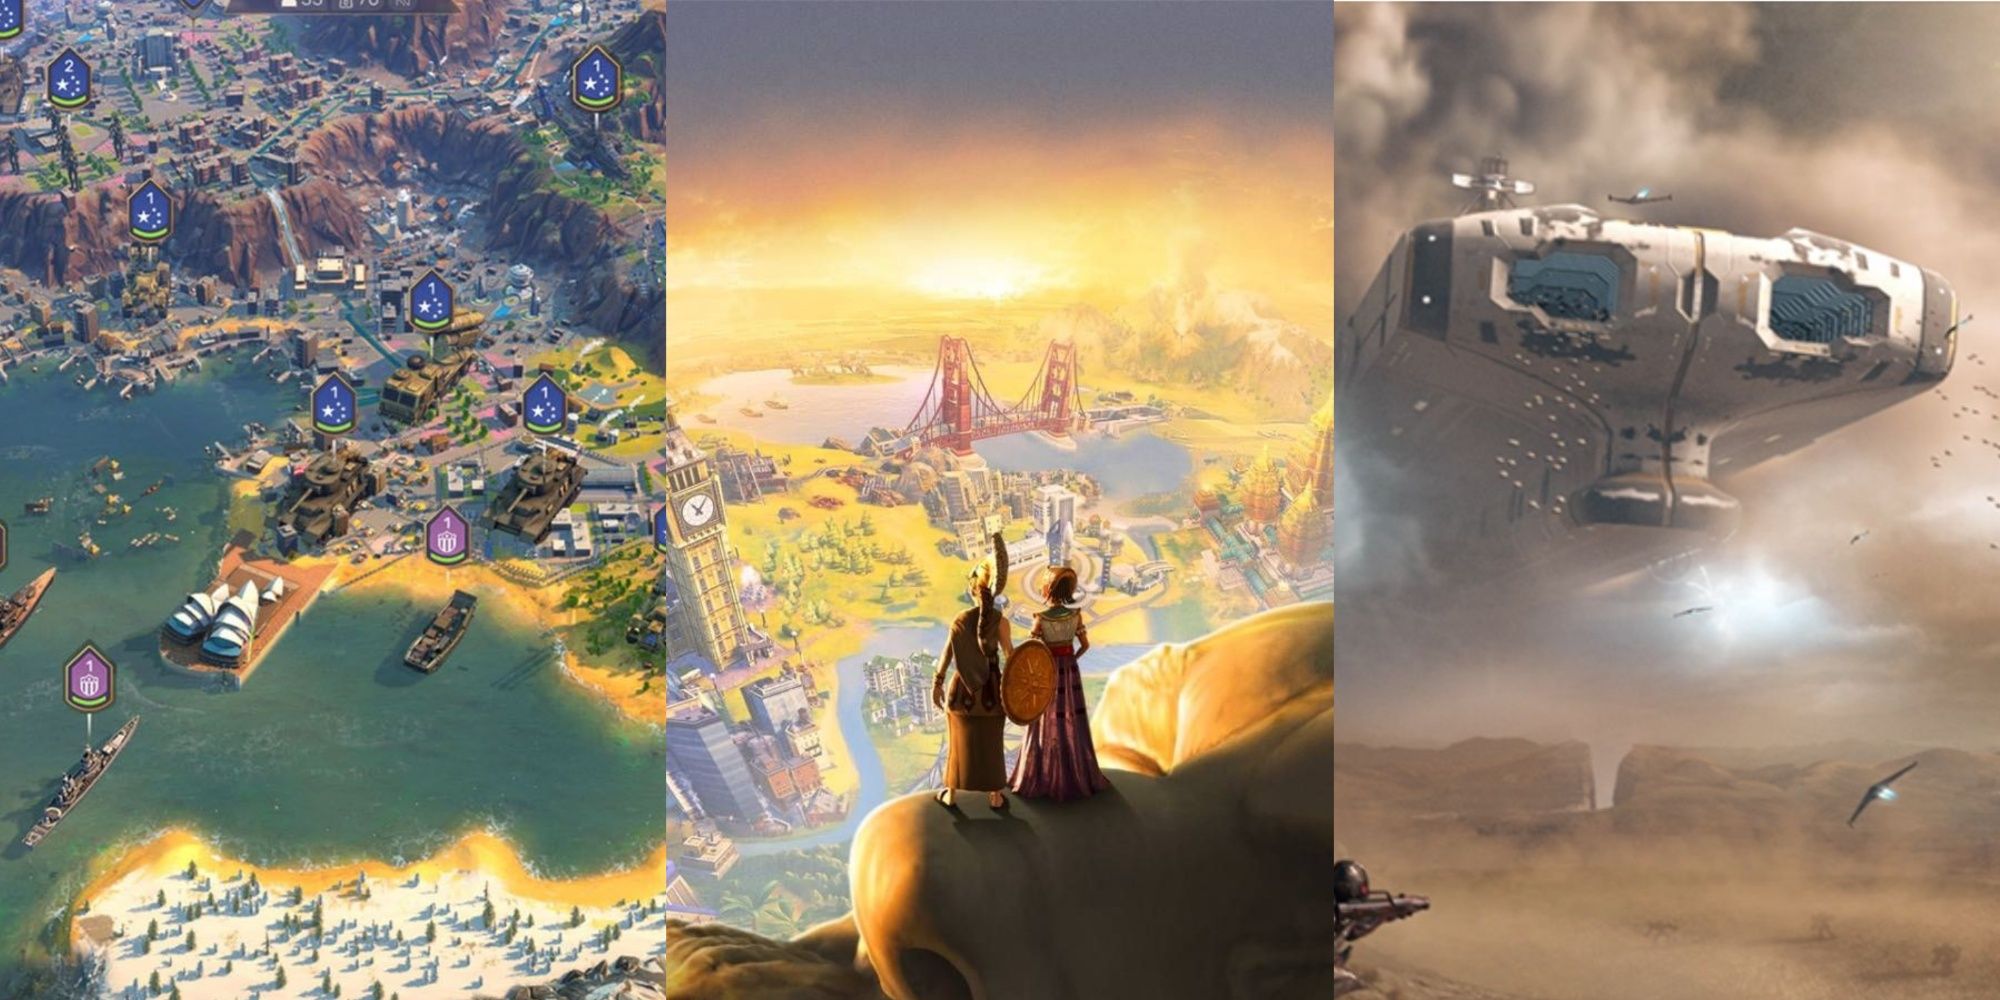 A trisplit of the map in Humankind, two people looking over a civilization in Civilization 6 and a spaceship in Endless Space 2